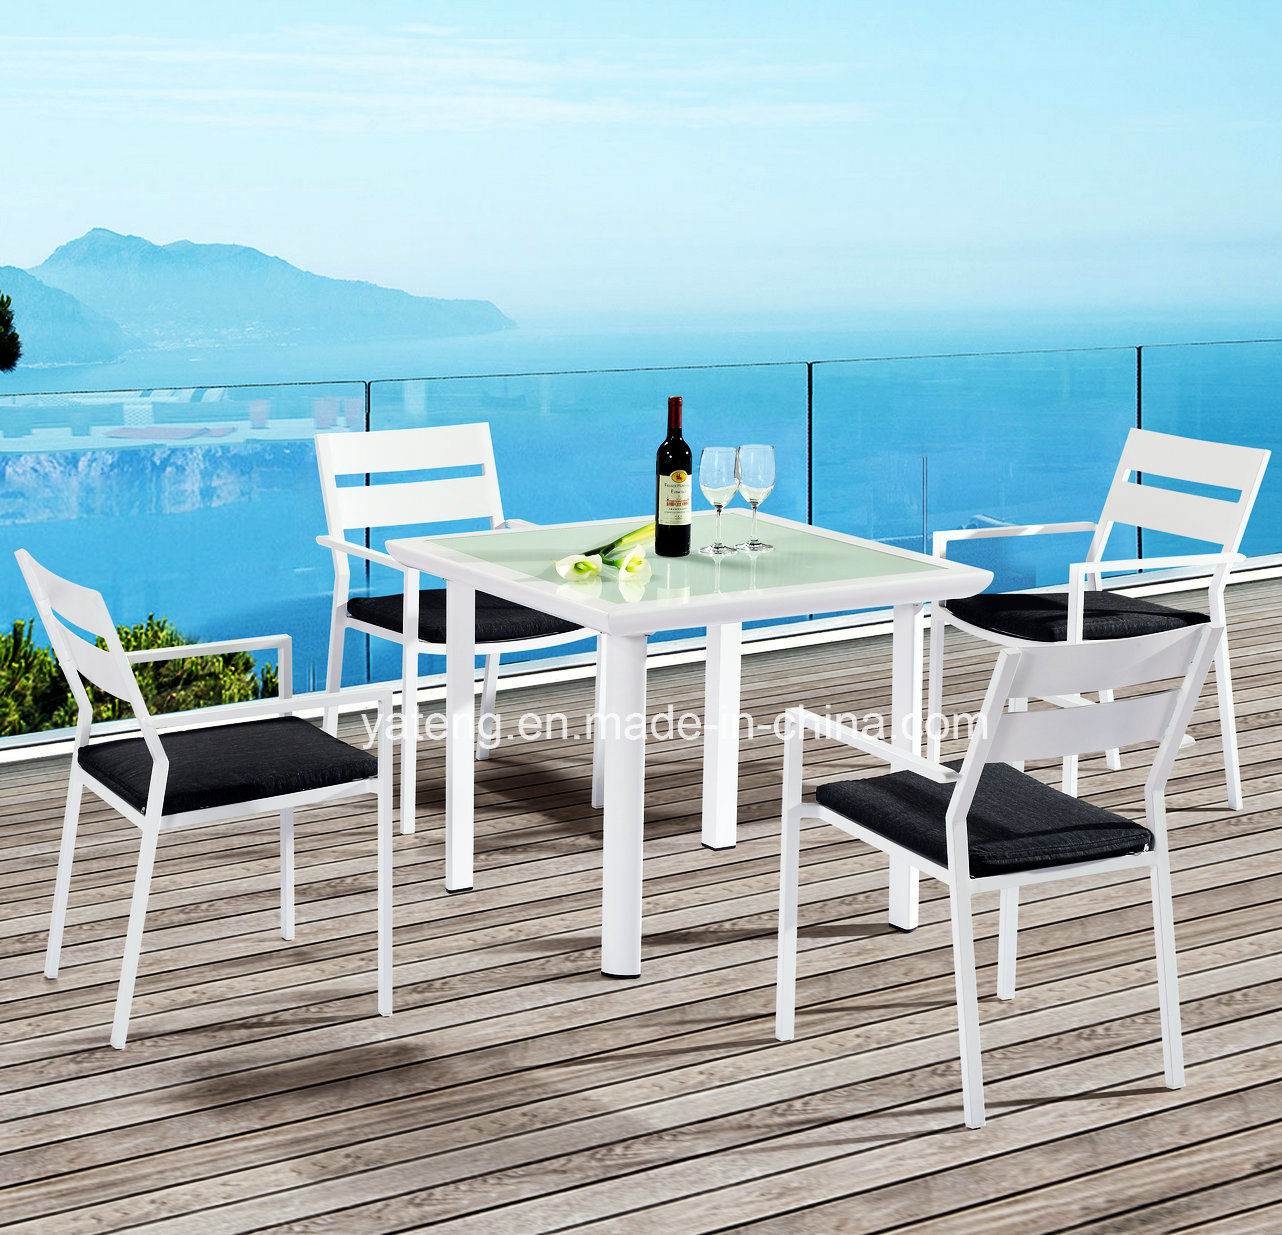 New Design High Quality Cheap 4 People Outdoor Furniture of Square Dining Set